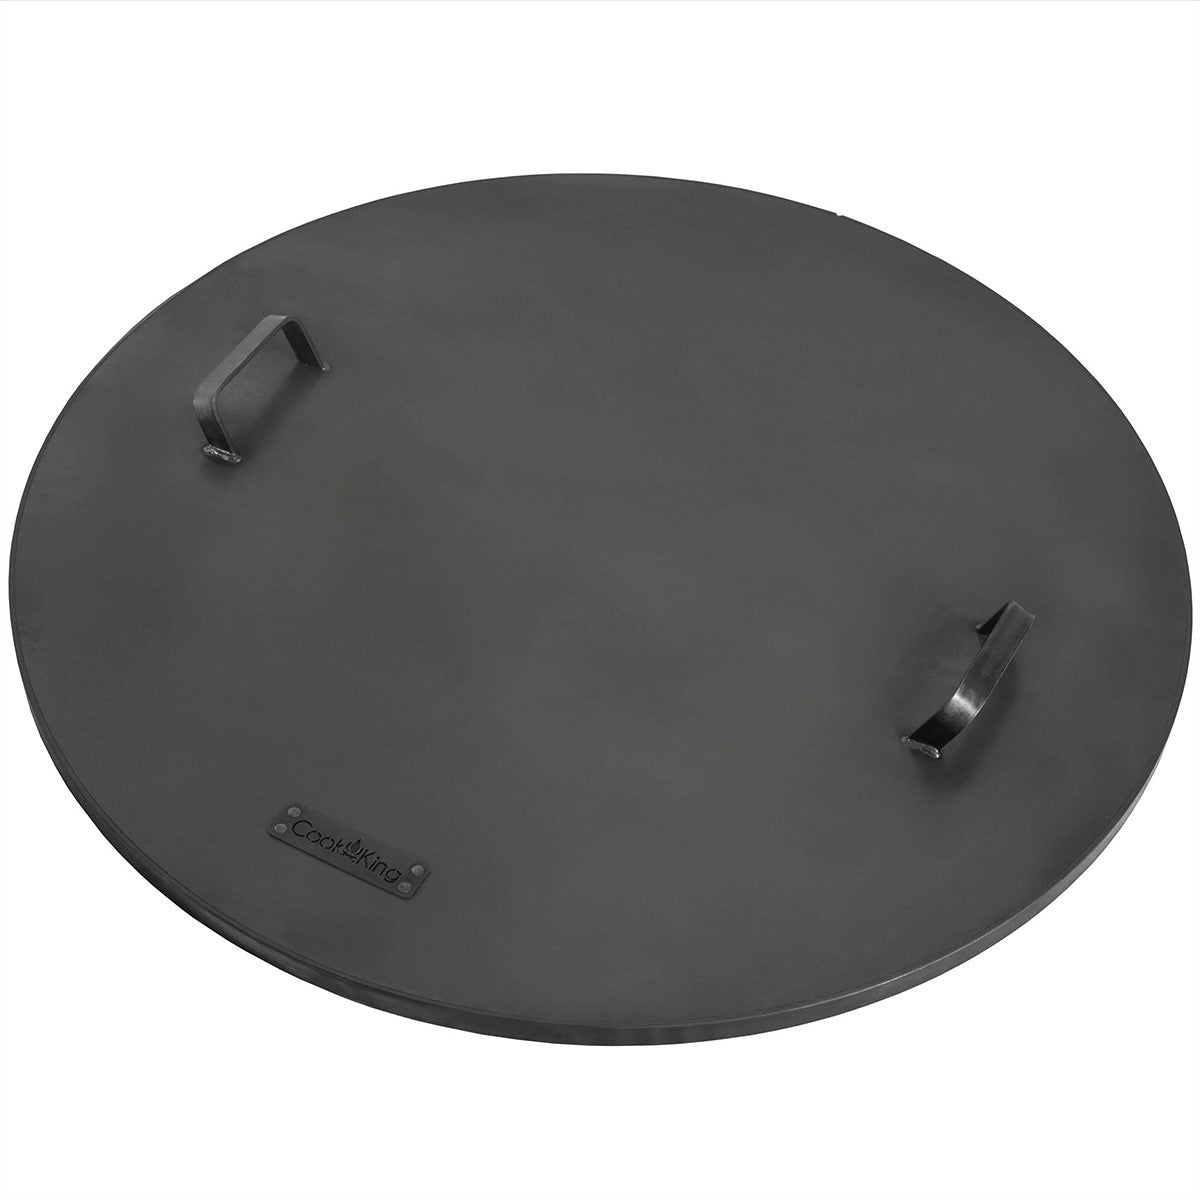 Fire Pit Round Cover Lid, 2mm Thickness, Fire Snuffer in Powder Coated Finish Rust Resistant, Drop-in Burner Fire Pit Pan Lid, Grill Fire Ring Lid with Handle, 40” inch Diameter - Good Directions